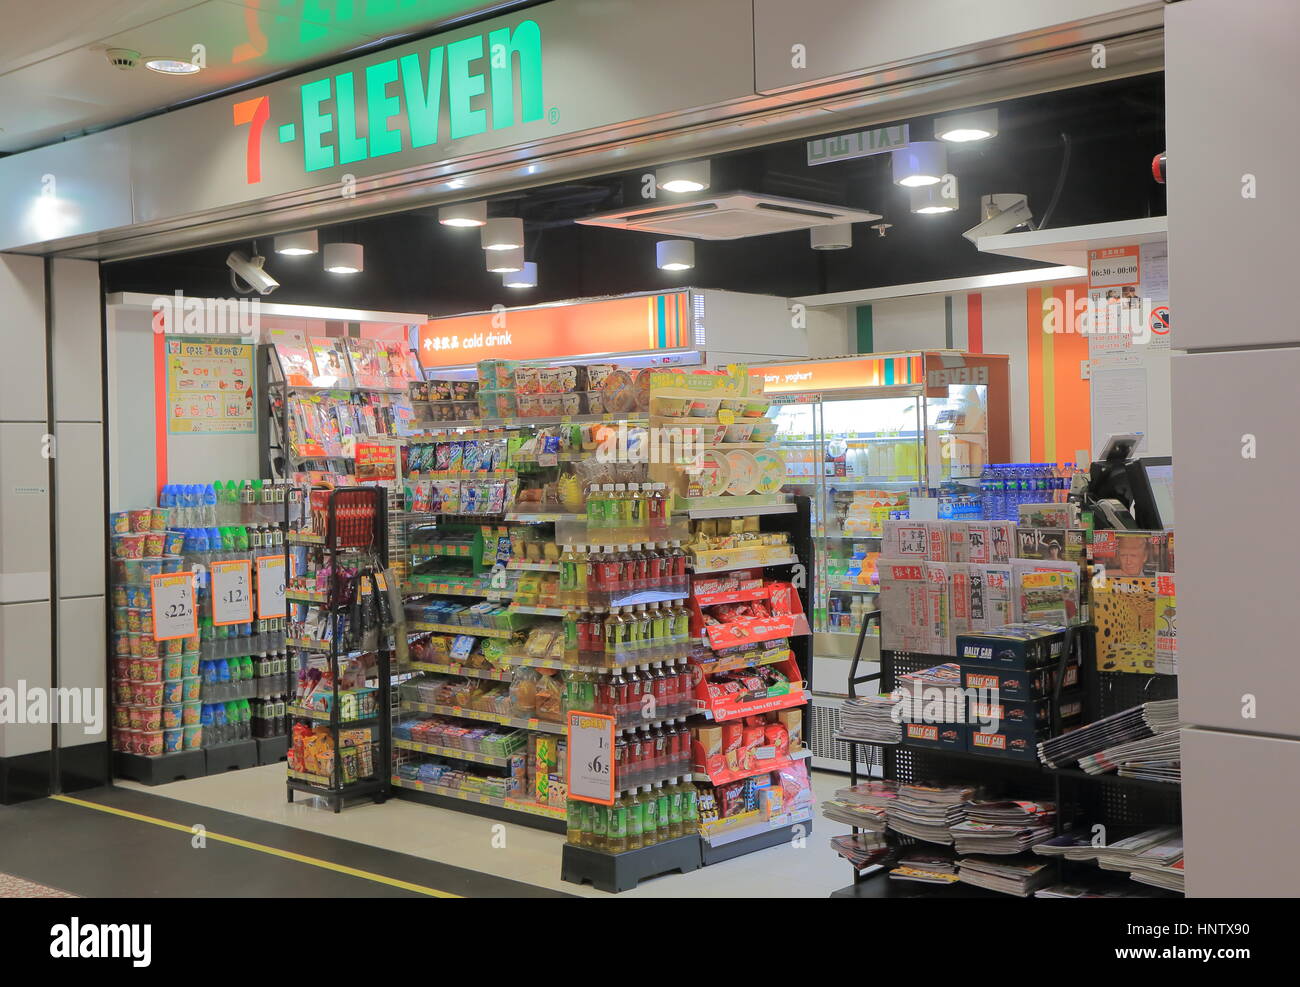 7 Eleven in Hong Kong. 7-Eleven is the world's largest operator, franchisor, and licensor of convenience stores with more than 50,000 outlets. Stock Photo